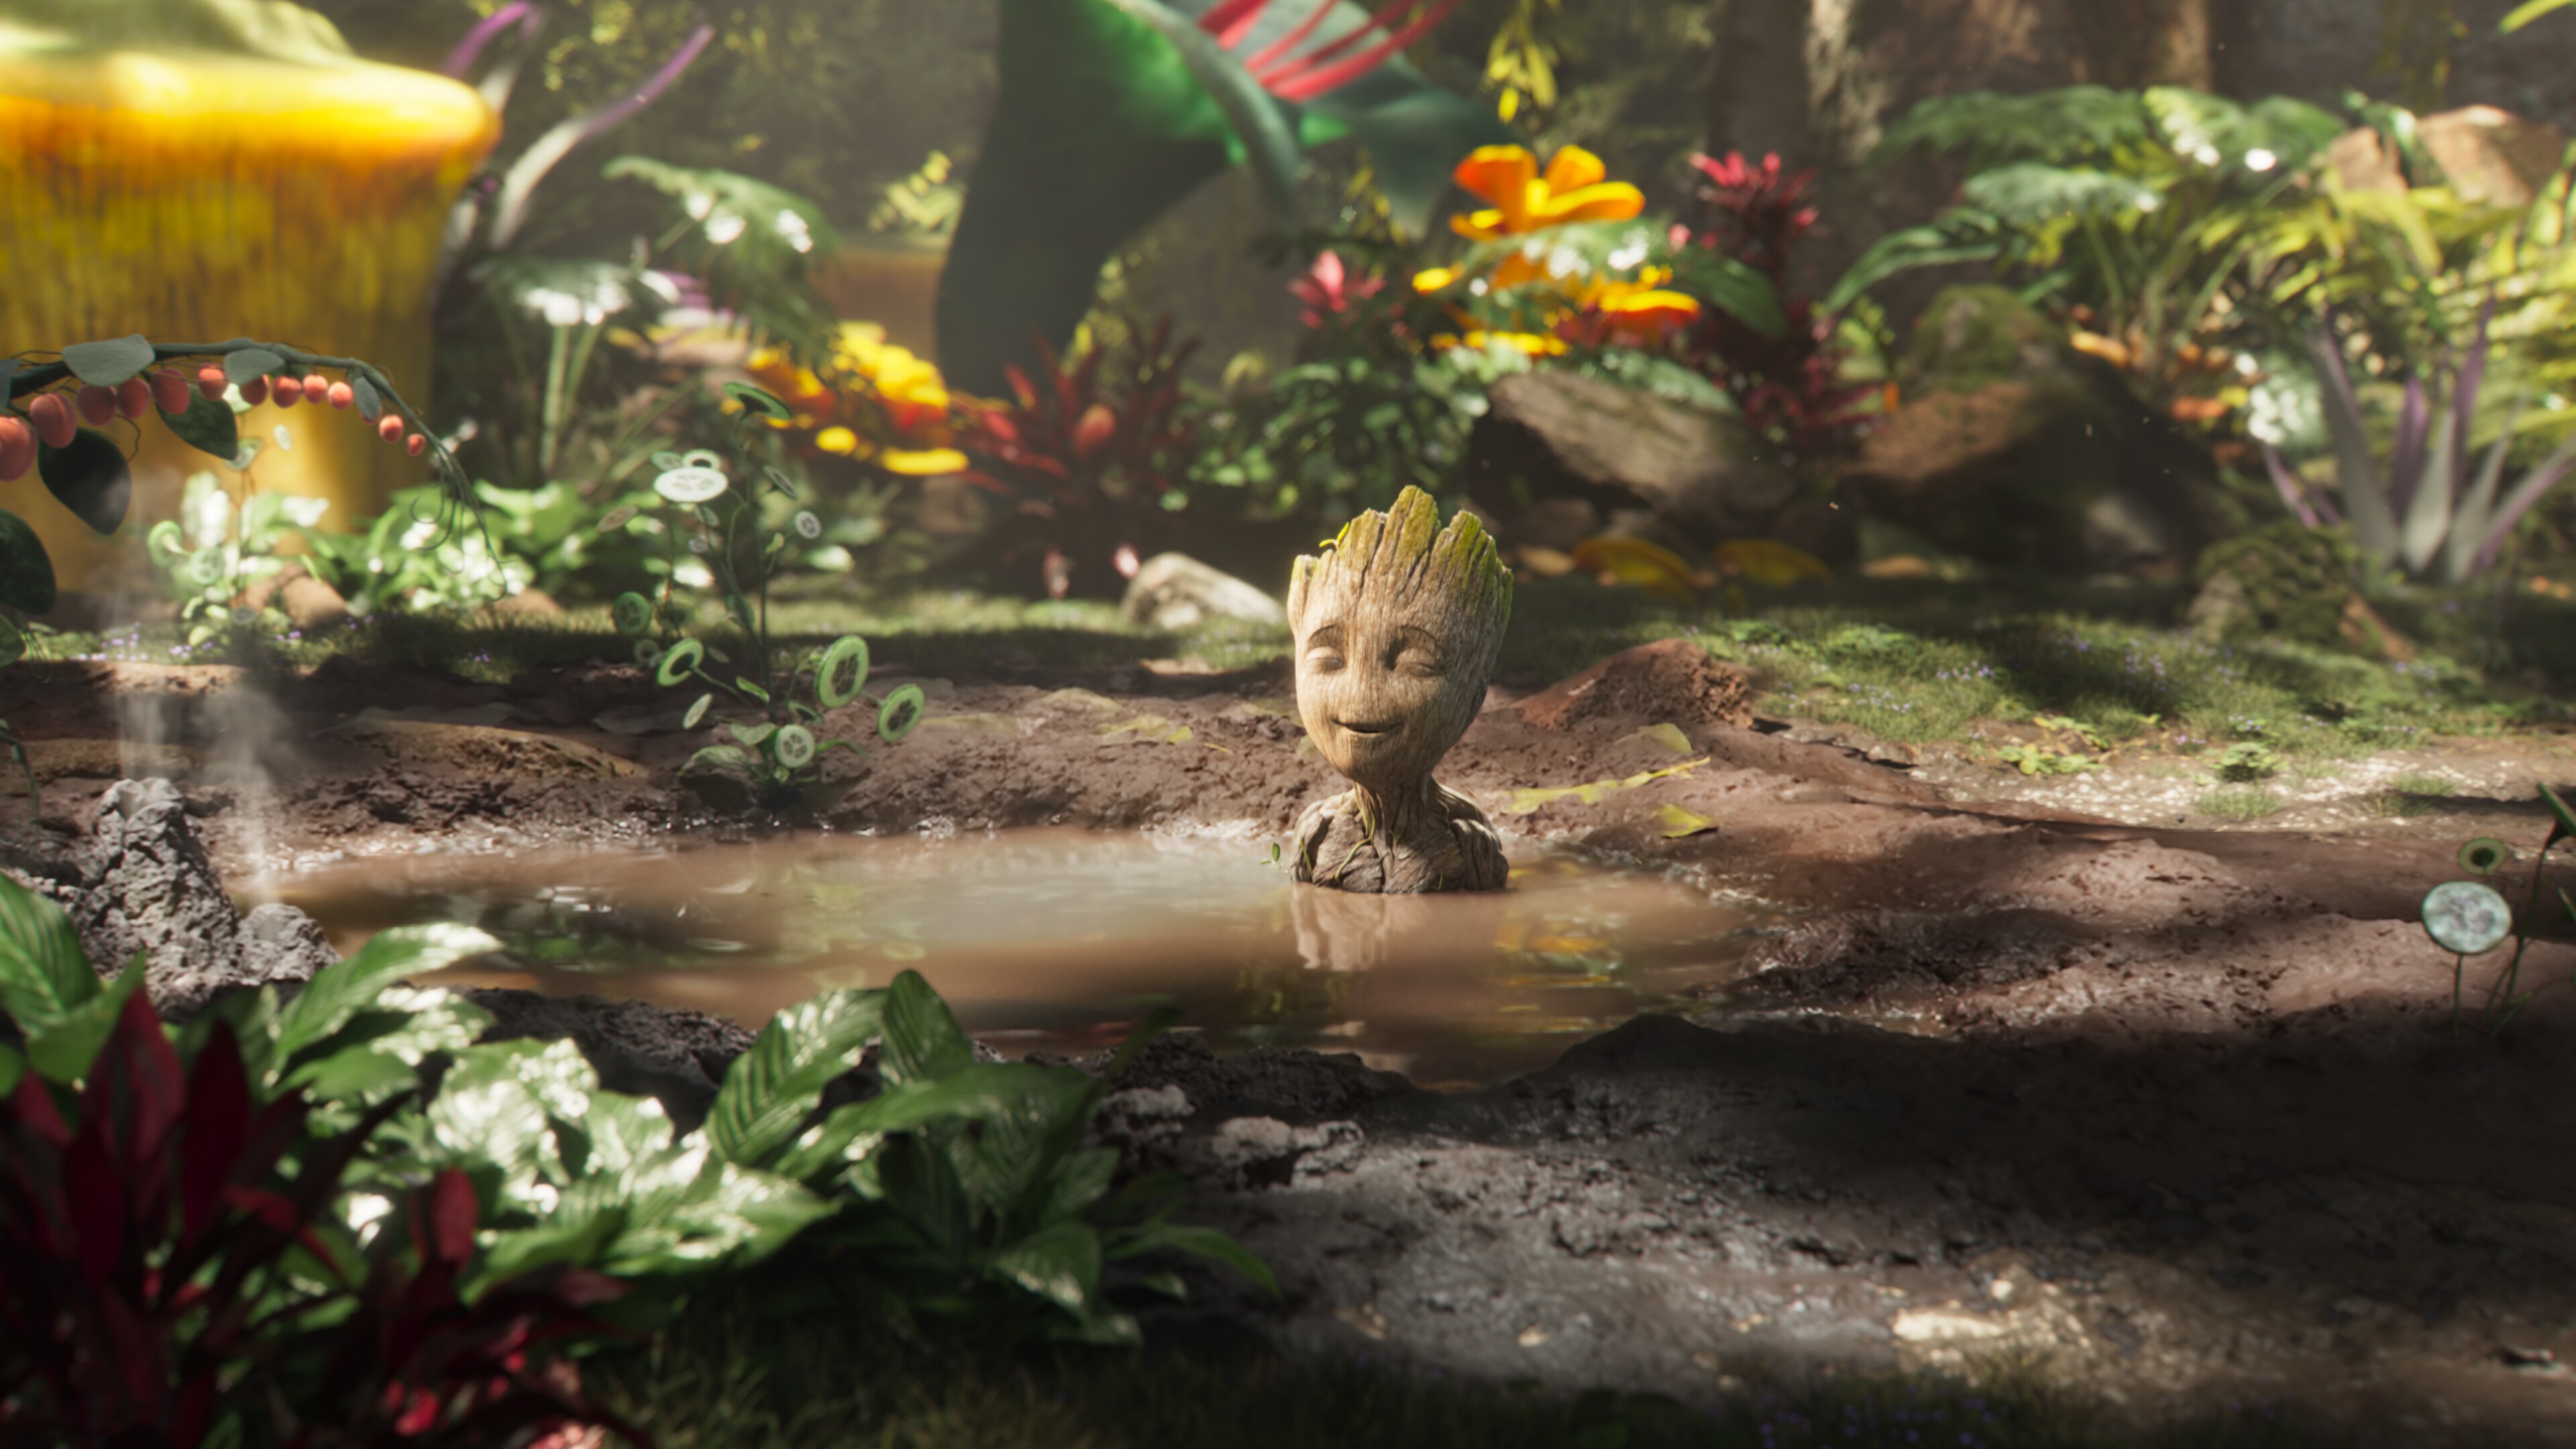 Groot relaxing in a puddle.